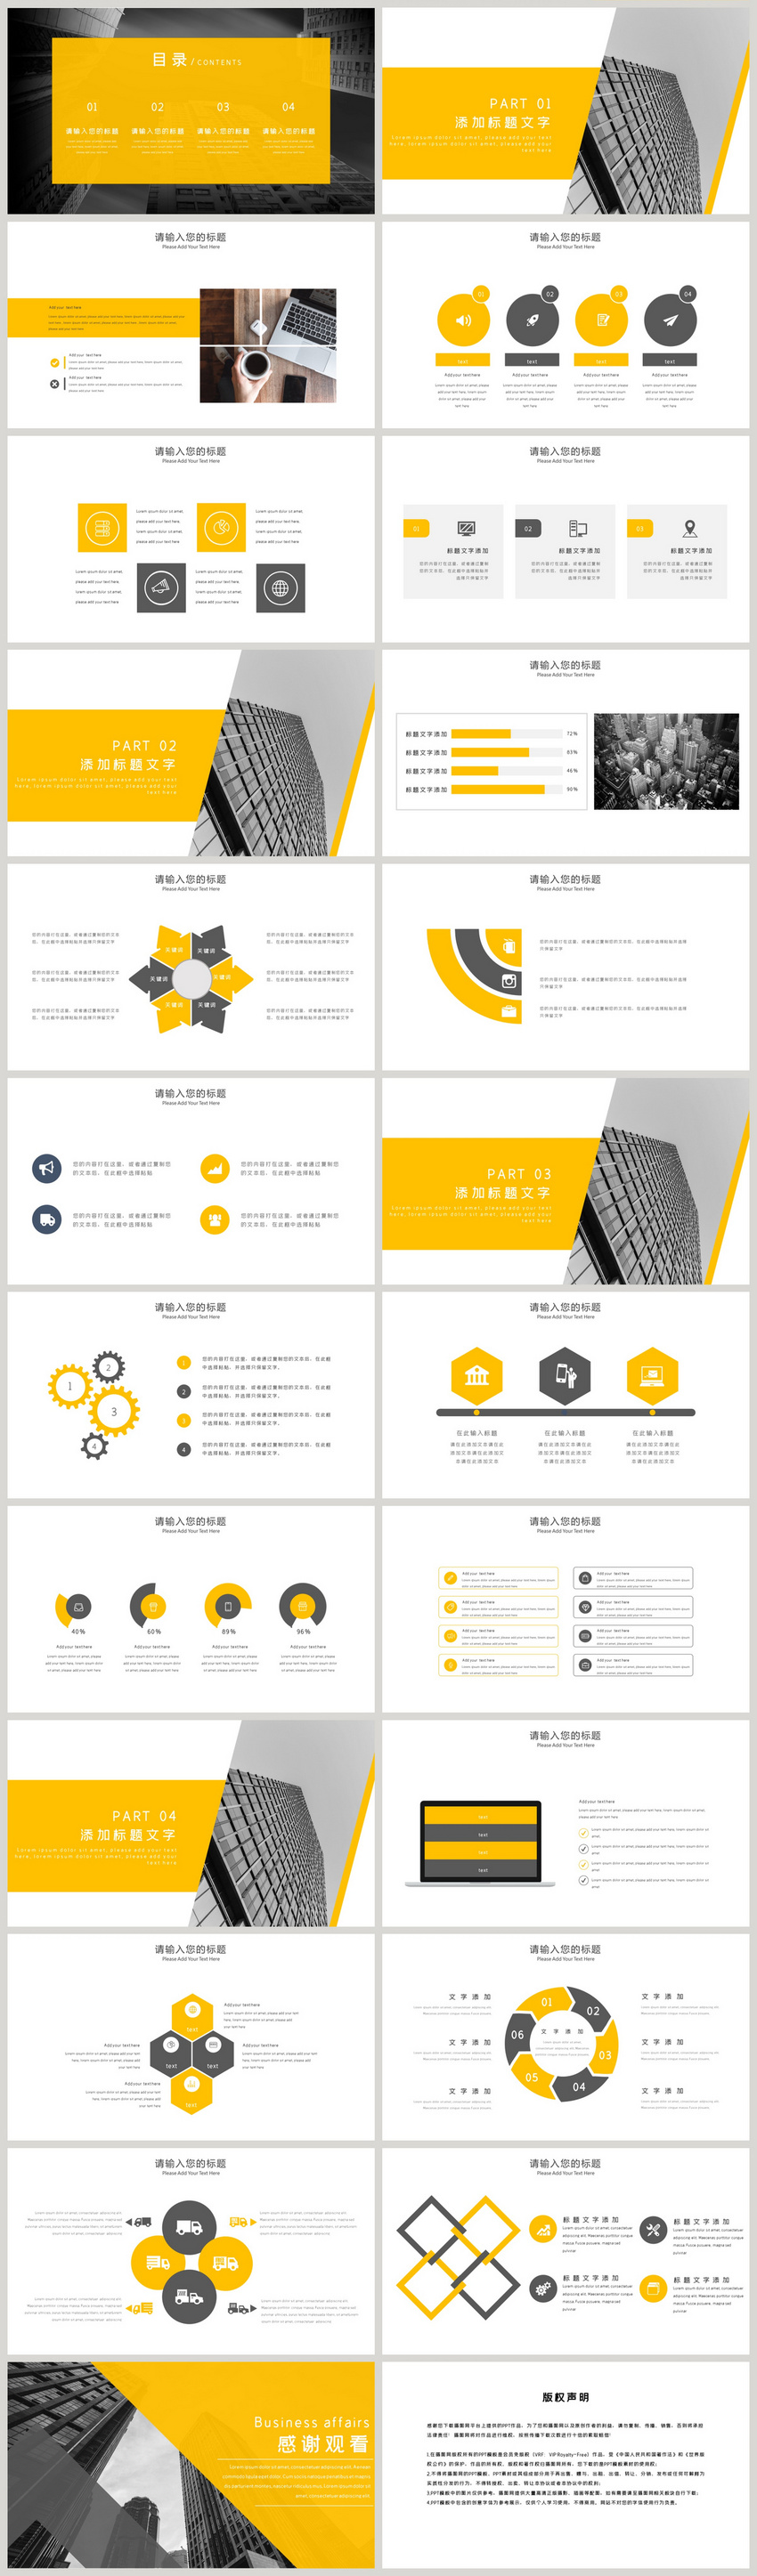 Black and yellow minimalist work report ppt template powerpoint ...